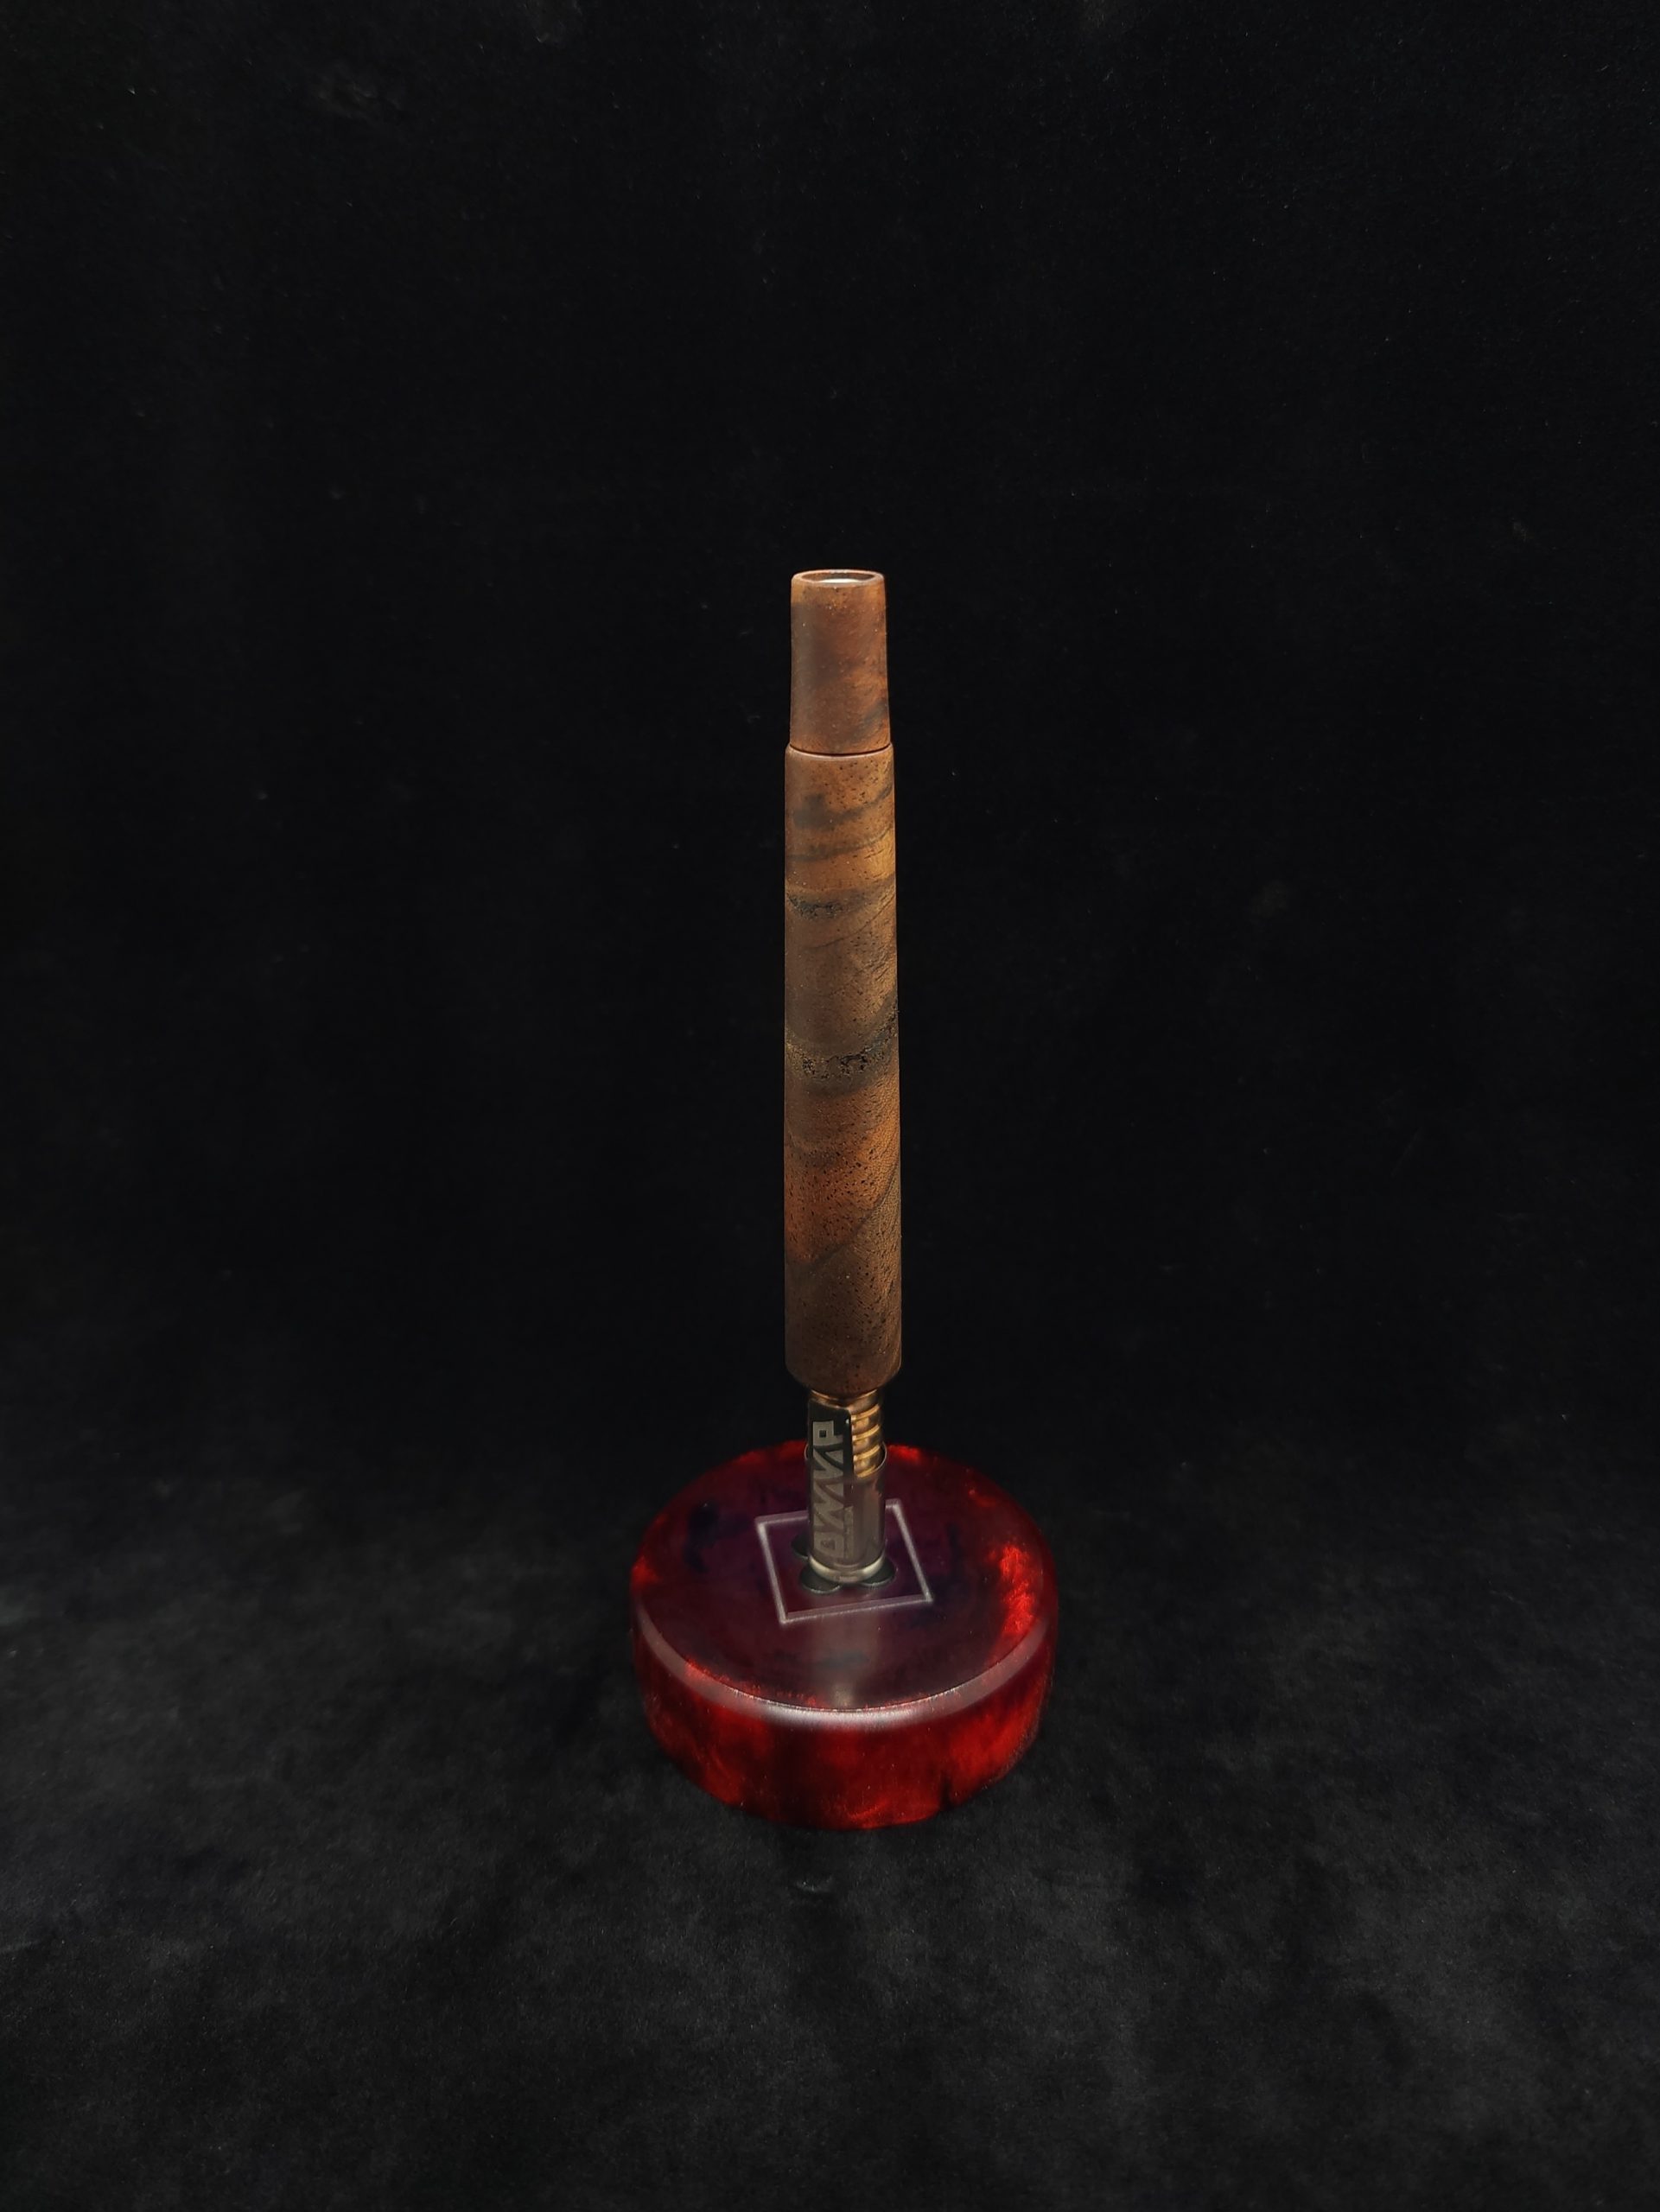 This image portrays The Blunt XL Dynavap Stem/Claro Walnut Burl Wood + Matching M.P. by Dovetail Woodwork.